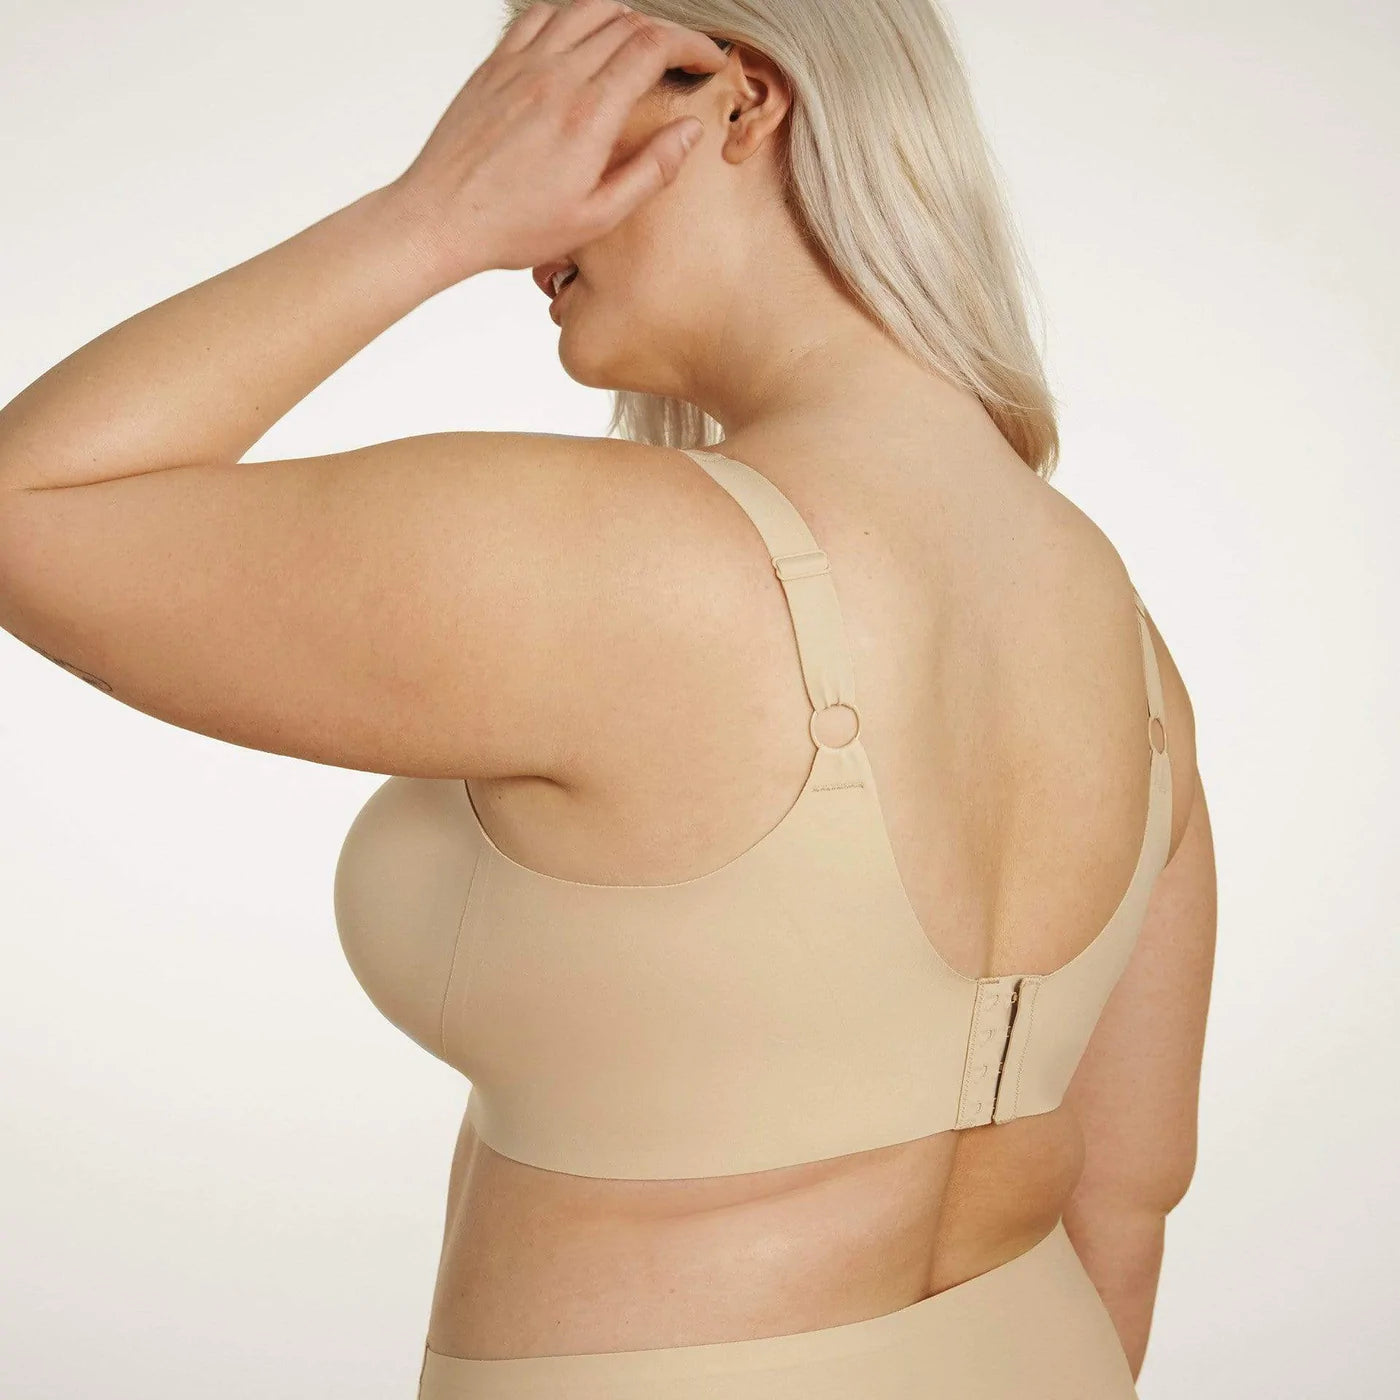 The Defy Collection is Designing Bras for Real Bodies